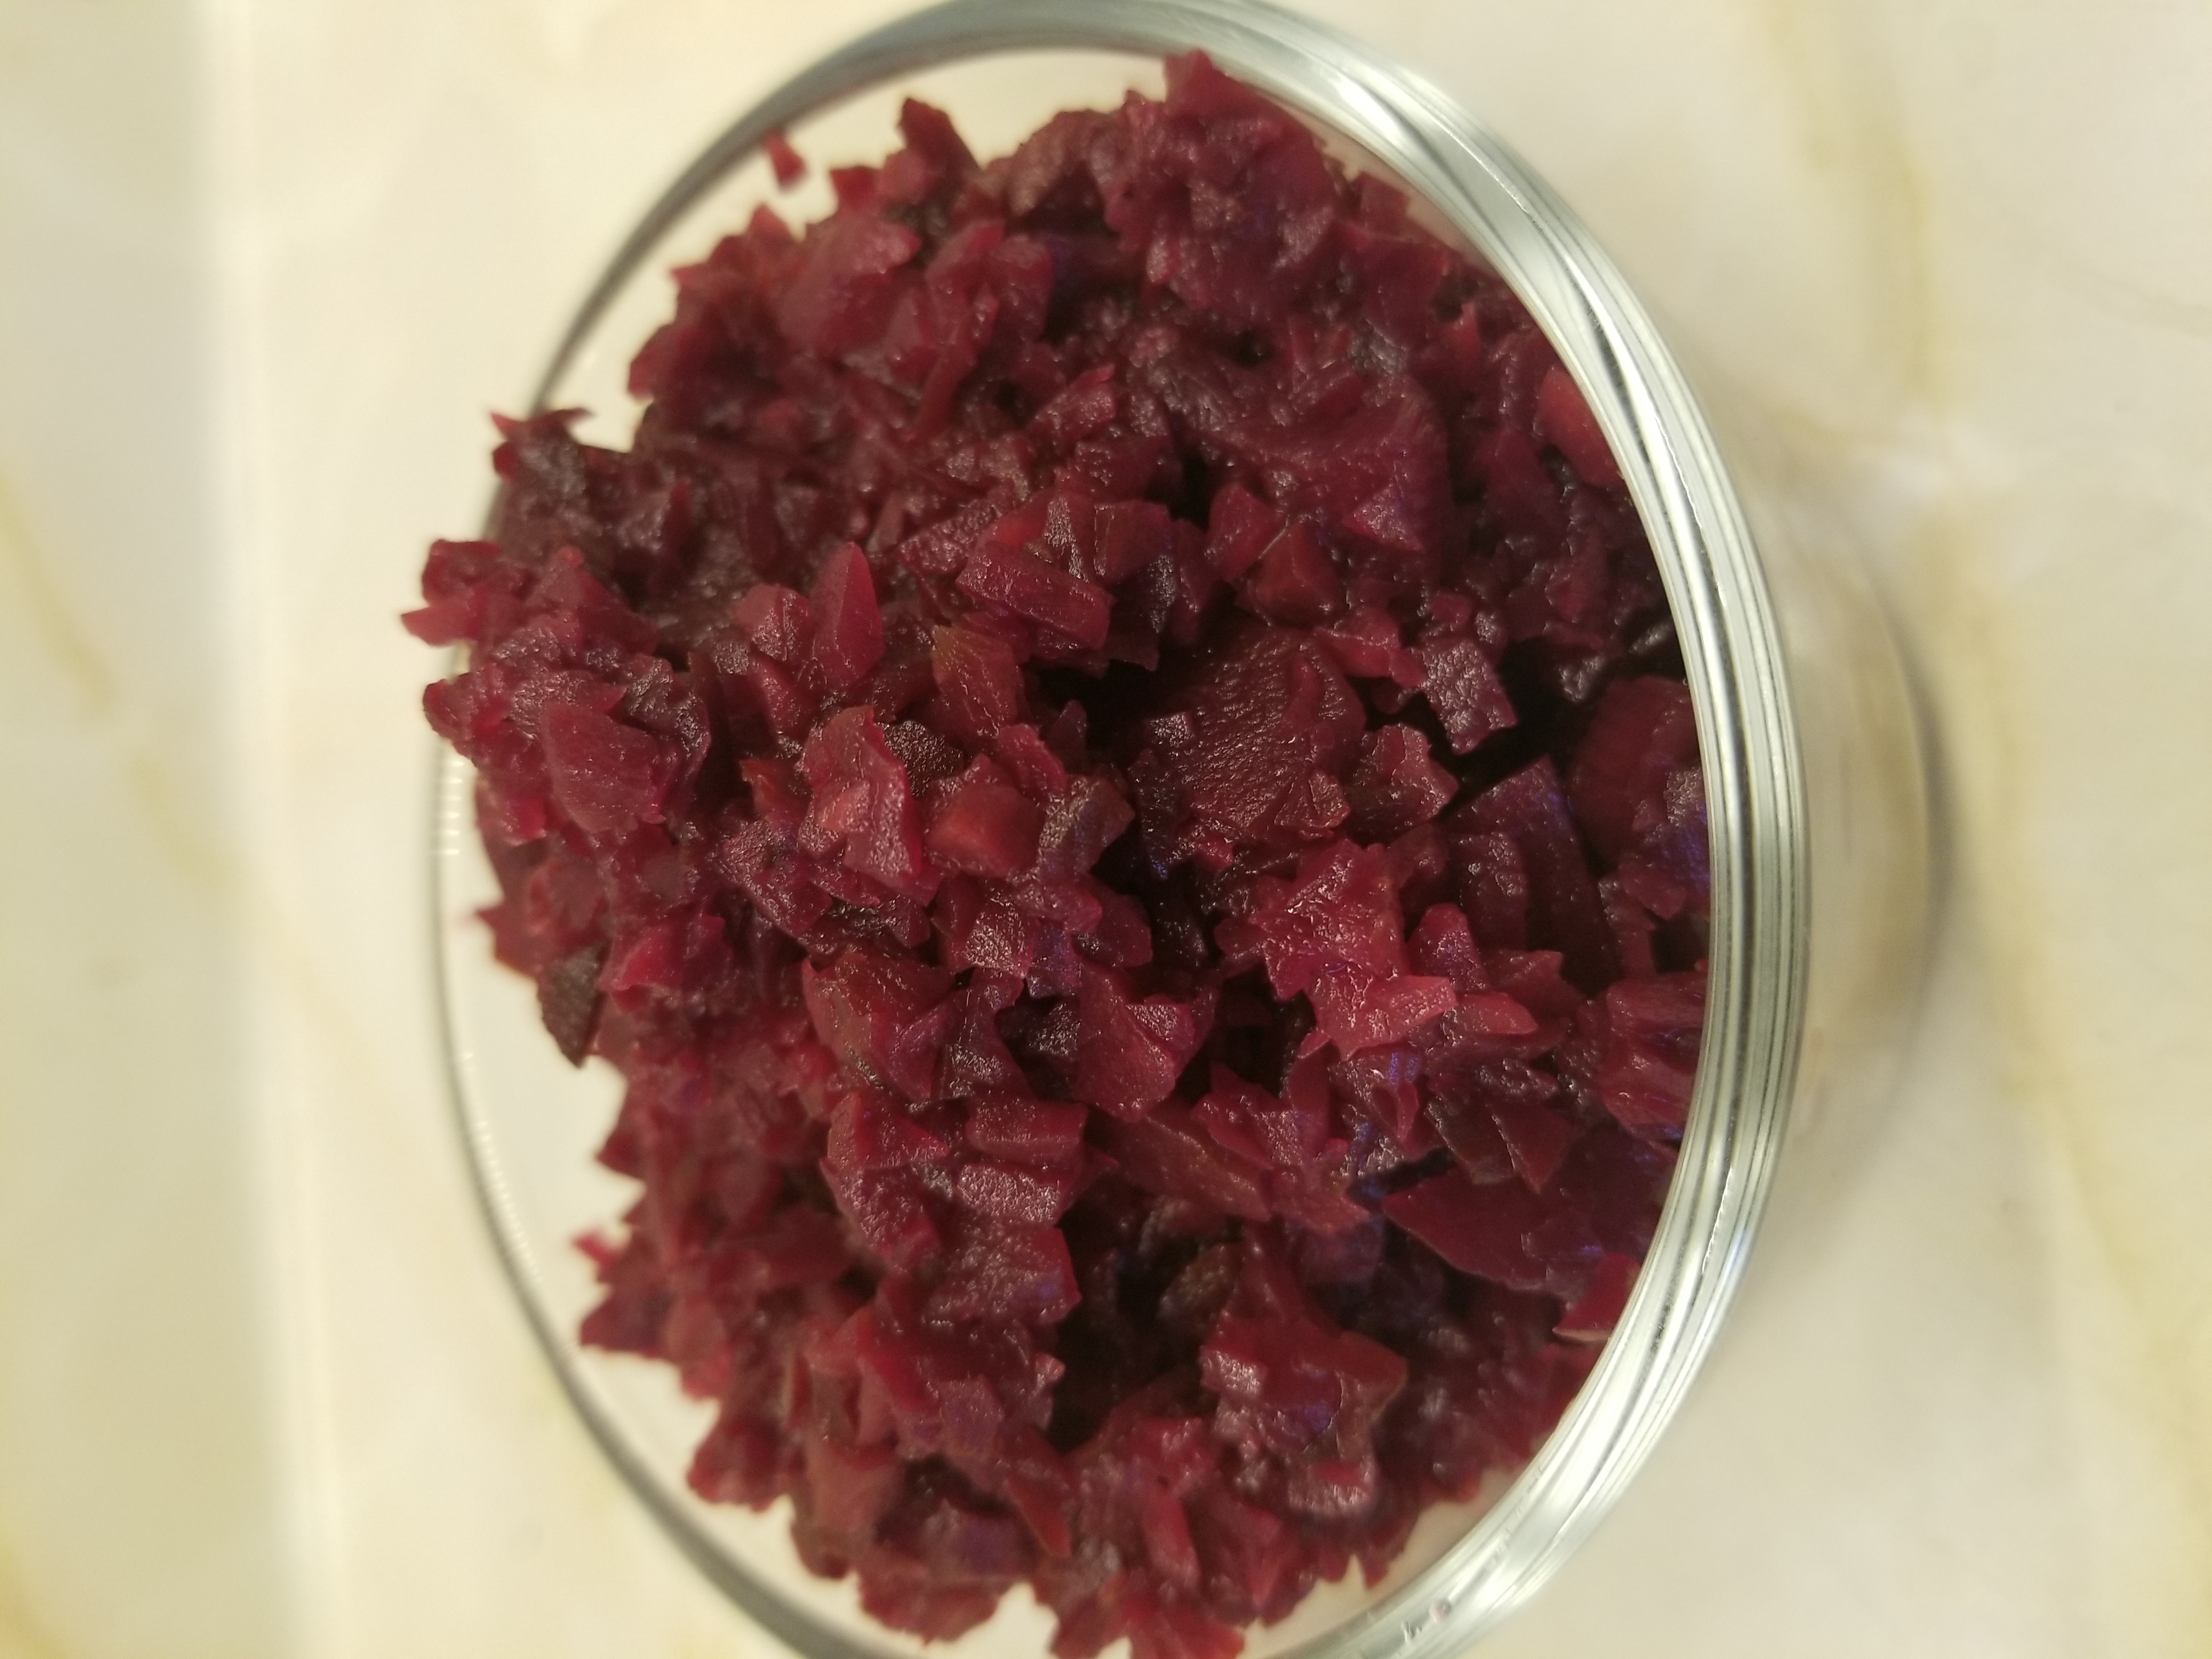 Fermented beets